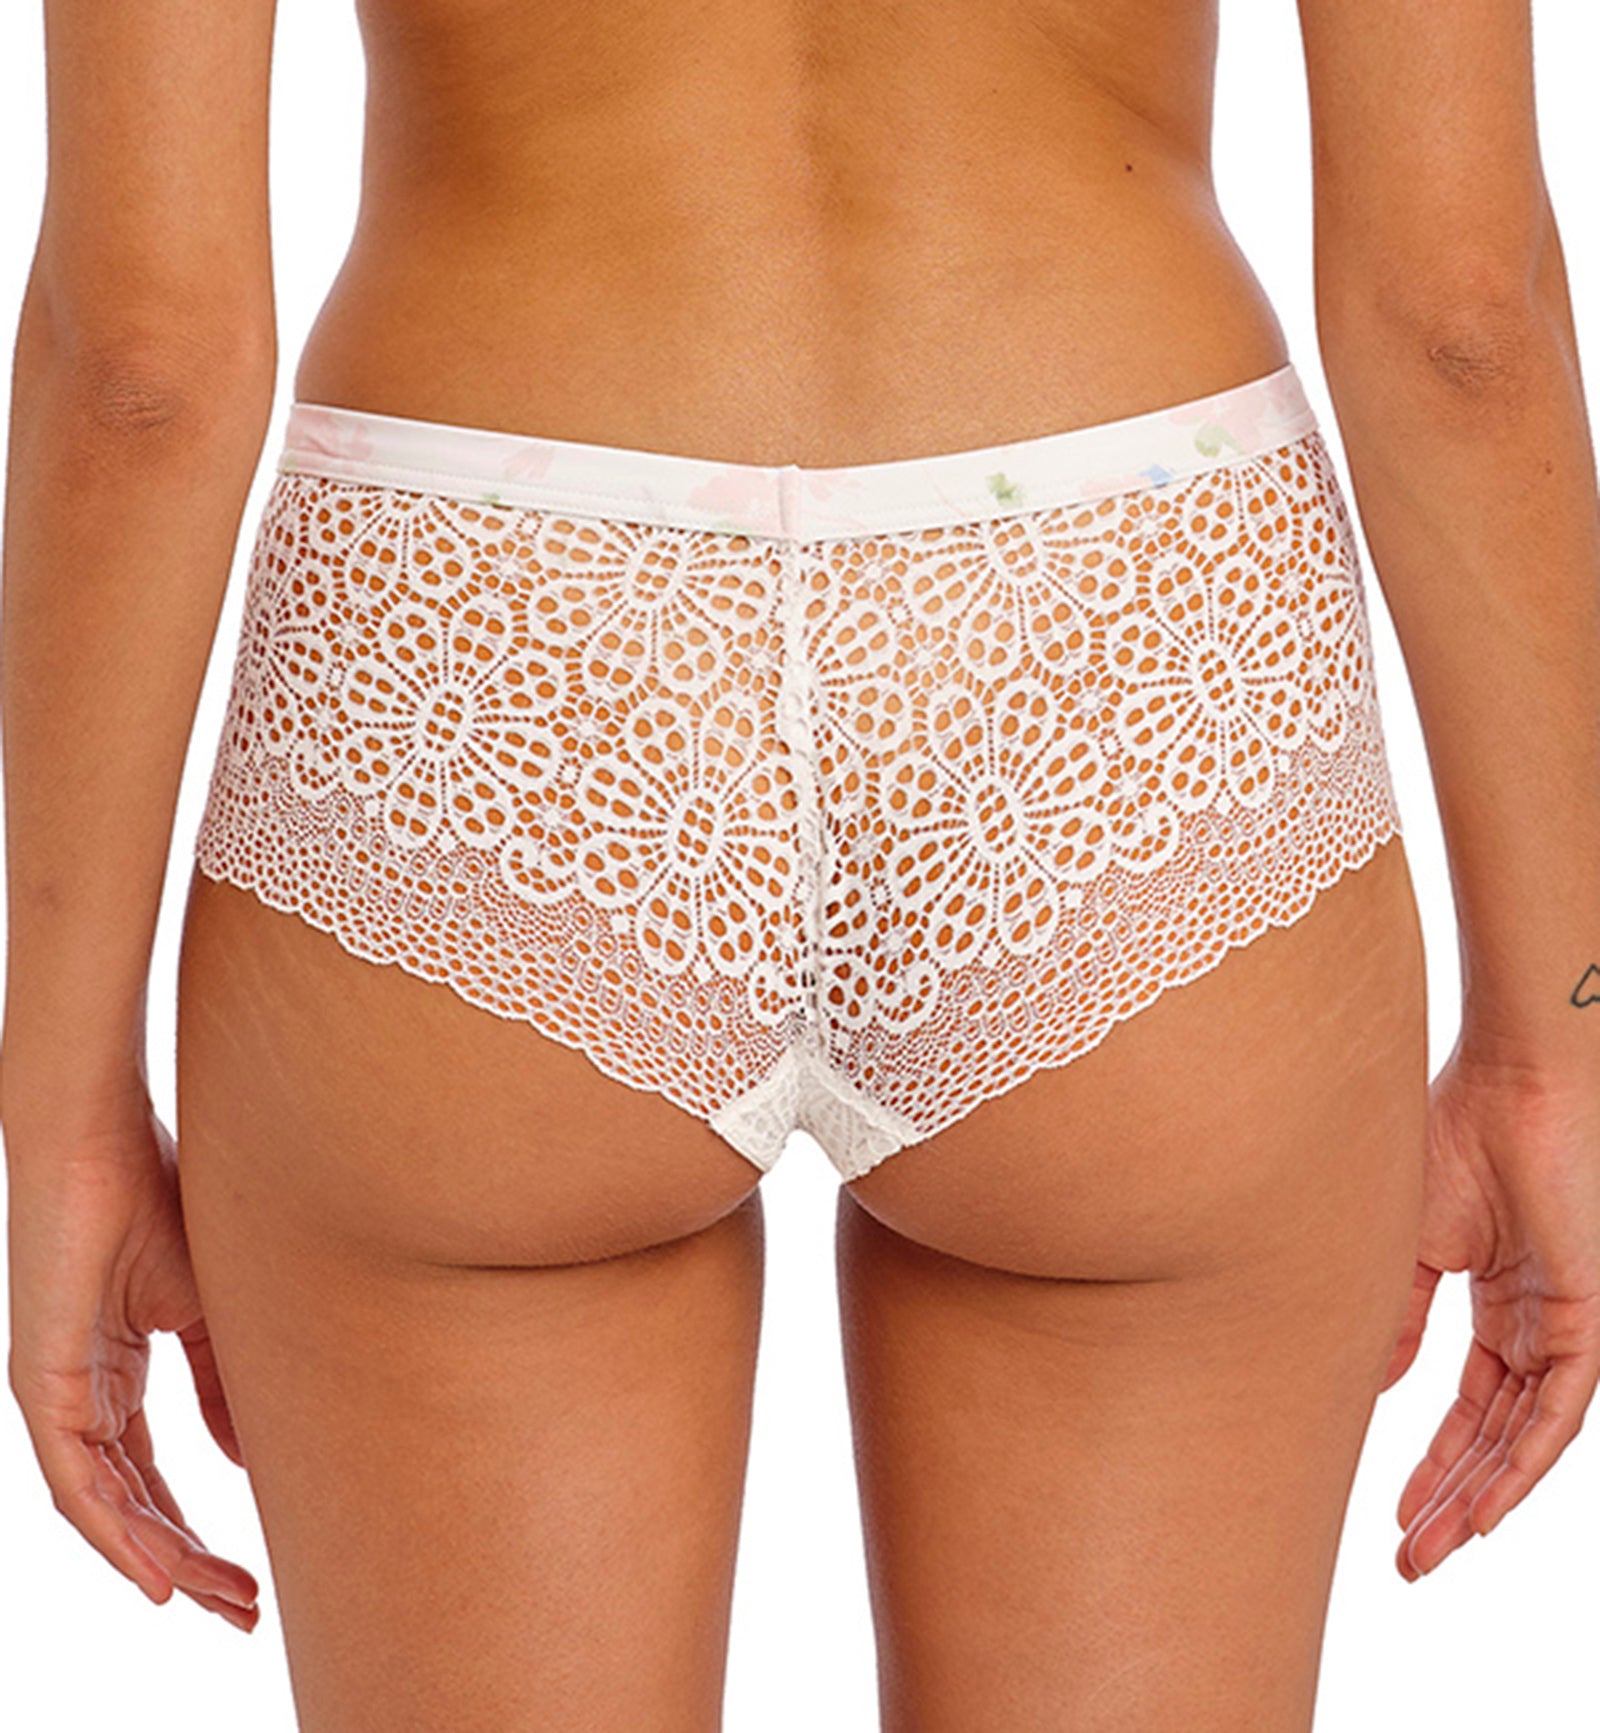 Freya Daydreaming Lace Short (400880),Small,Flora White - Flora White,Small